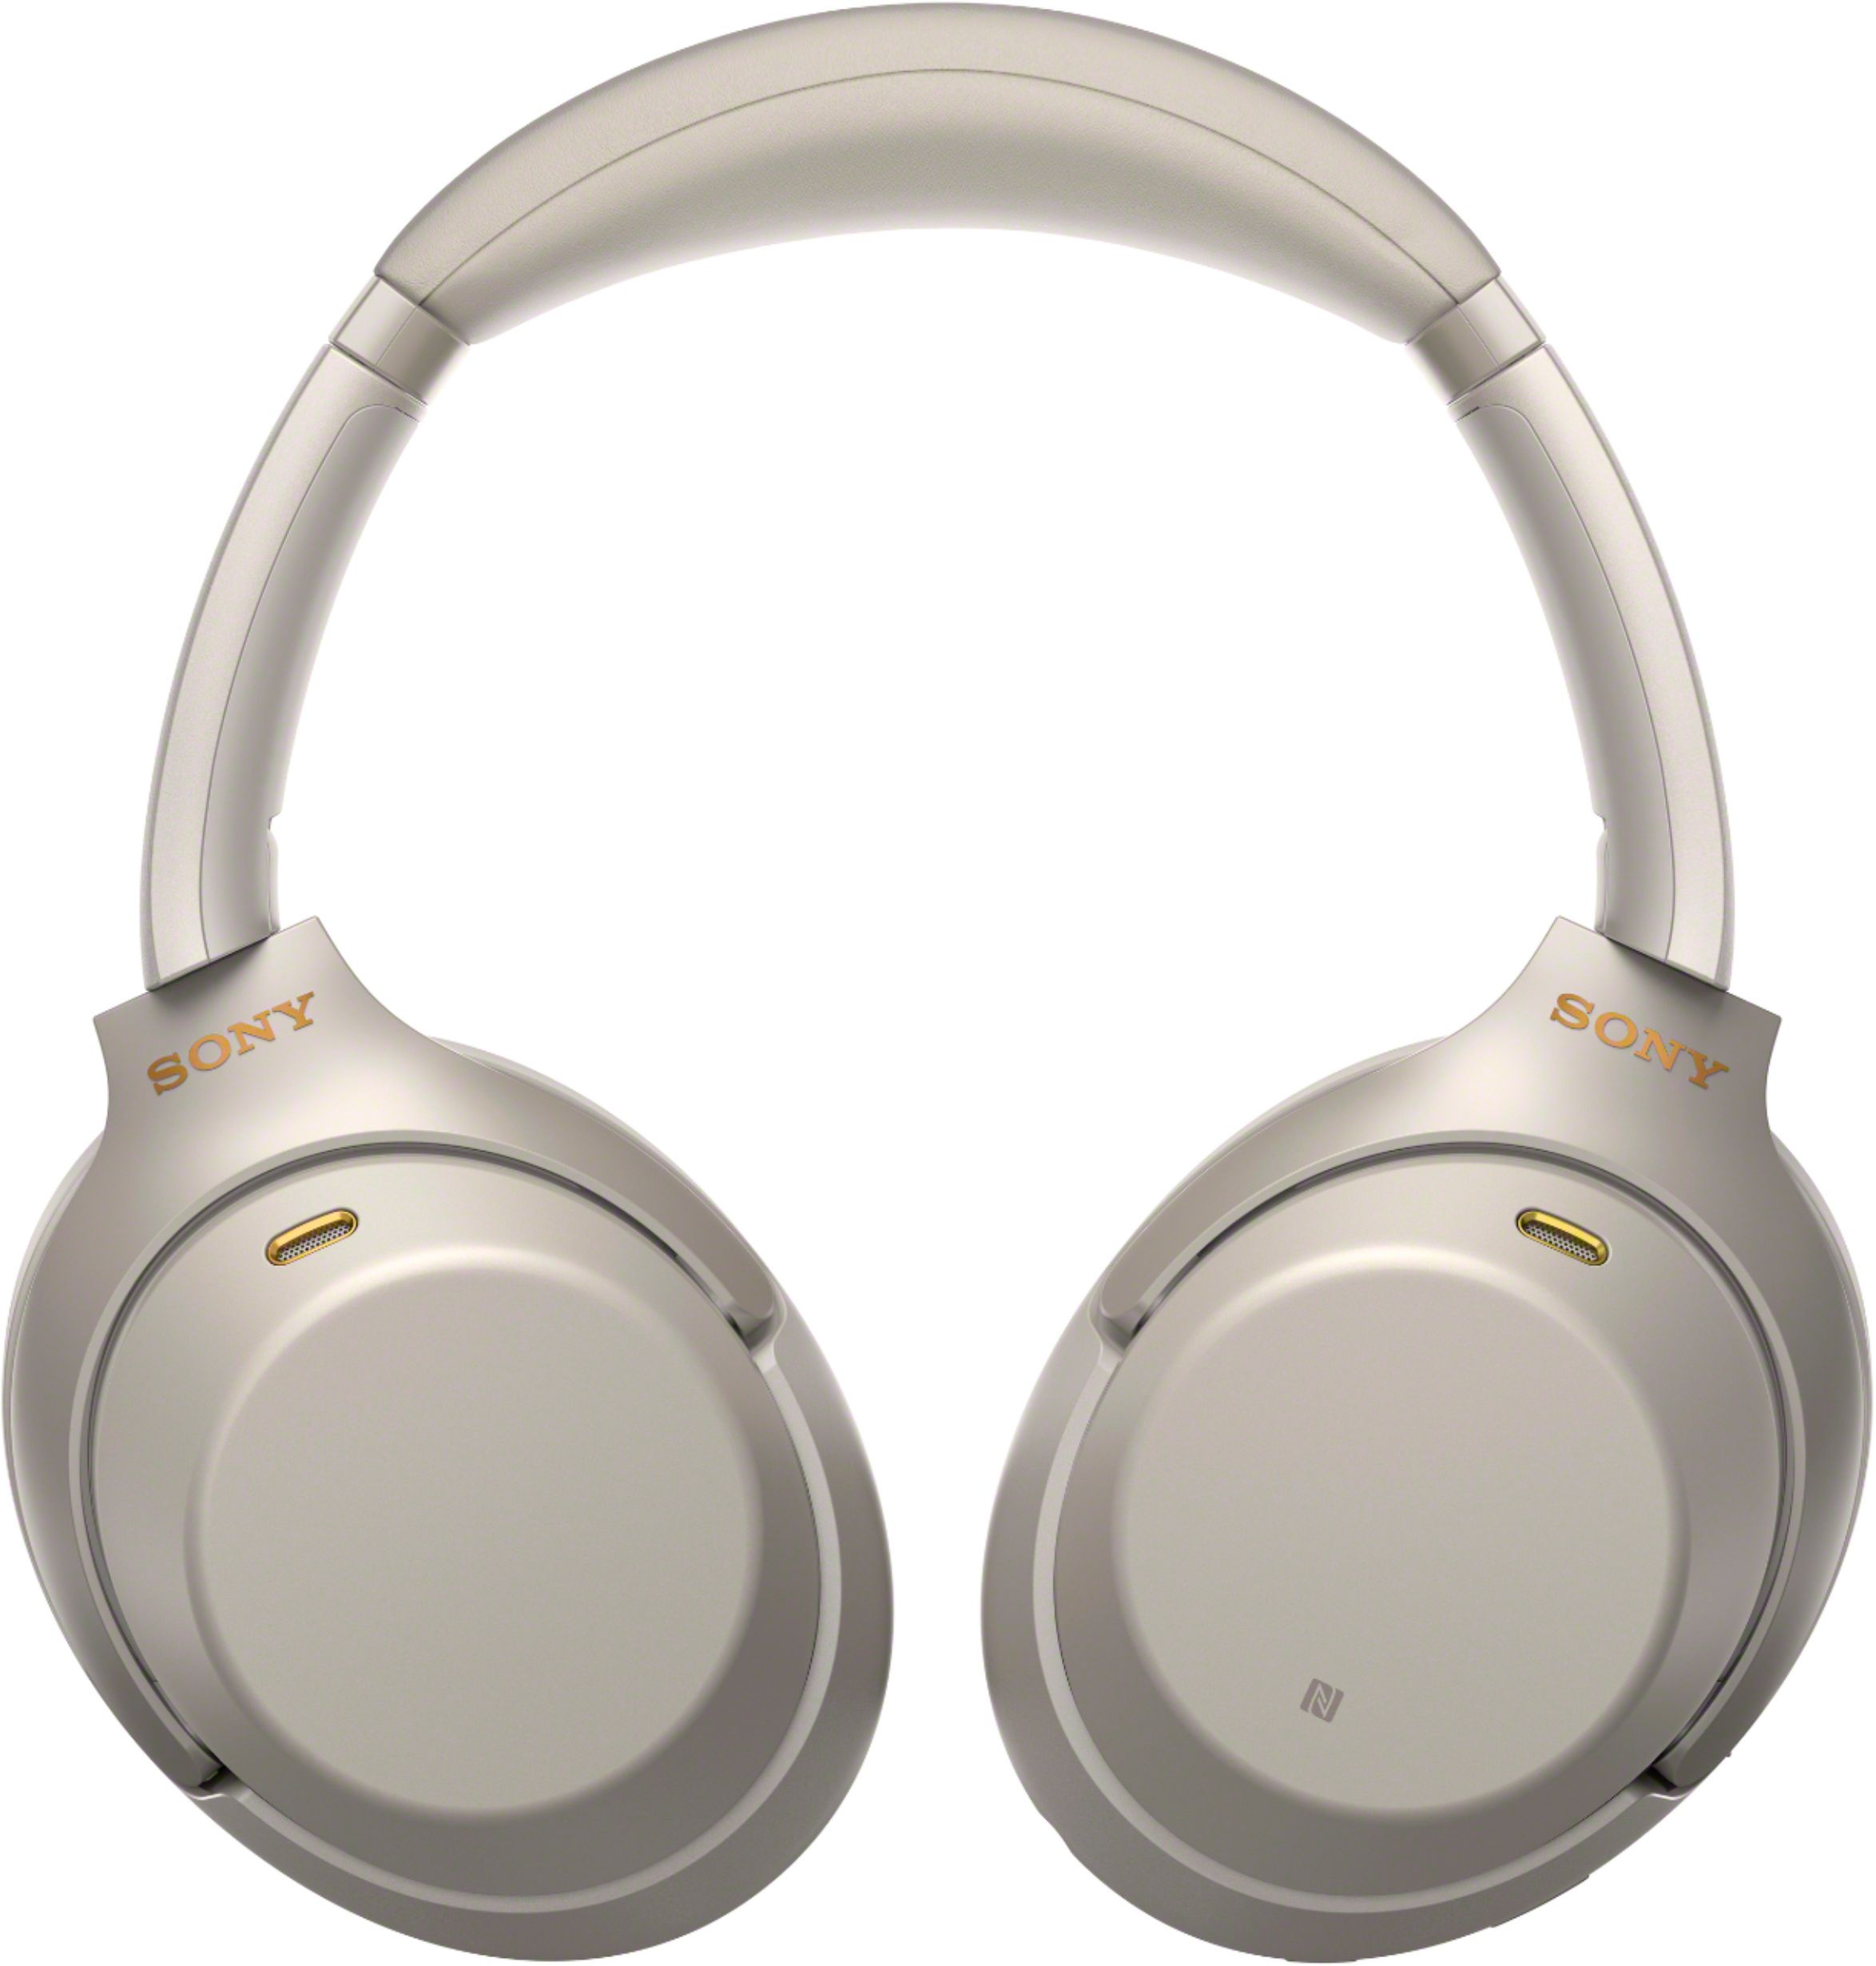 Sony WH-1000XM3 Wireless Noise Cancelling Over-the-Ear Headphones 